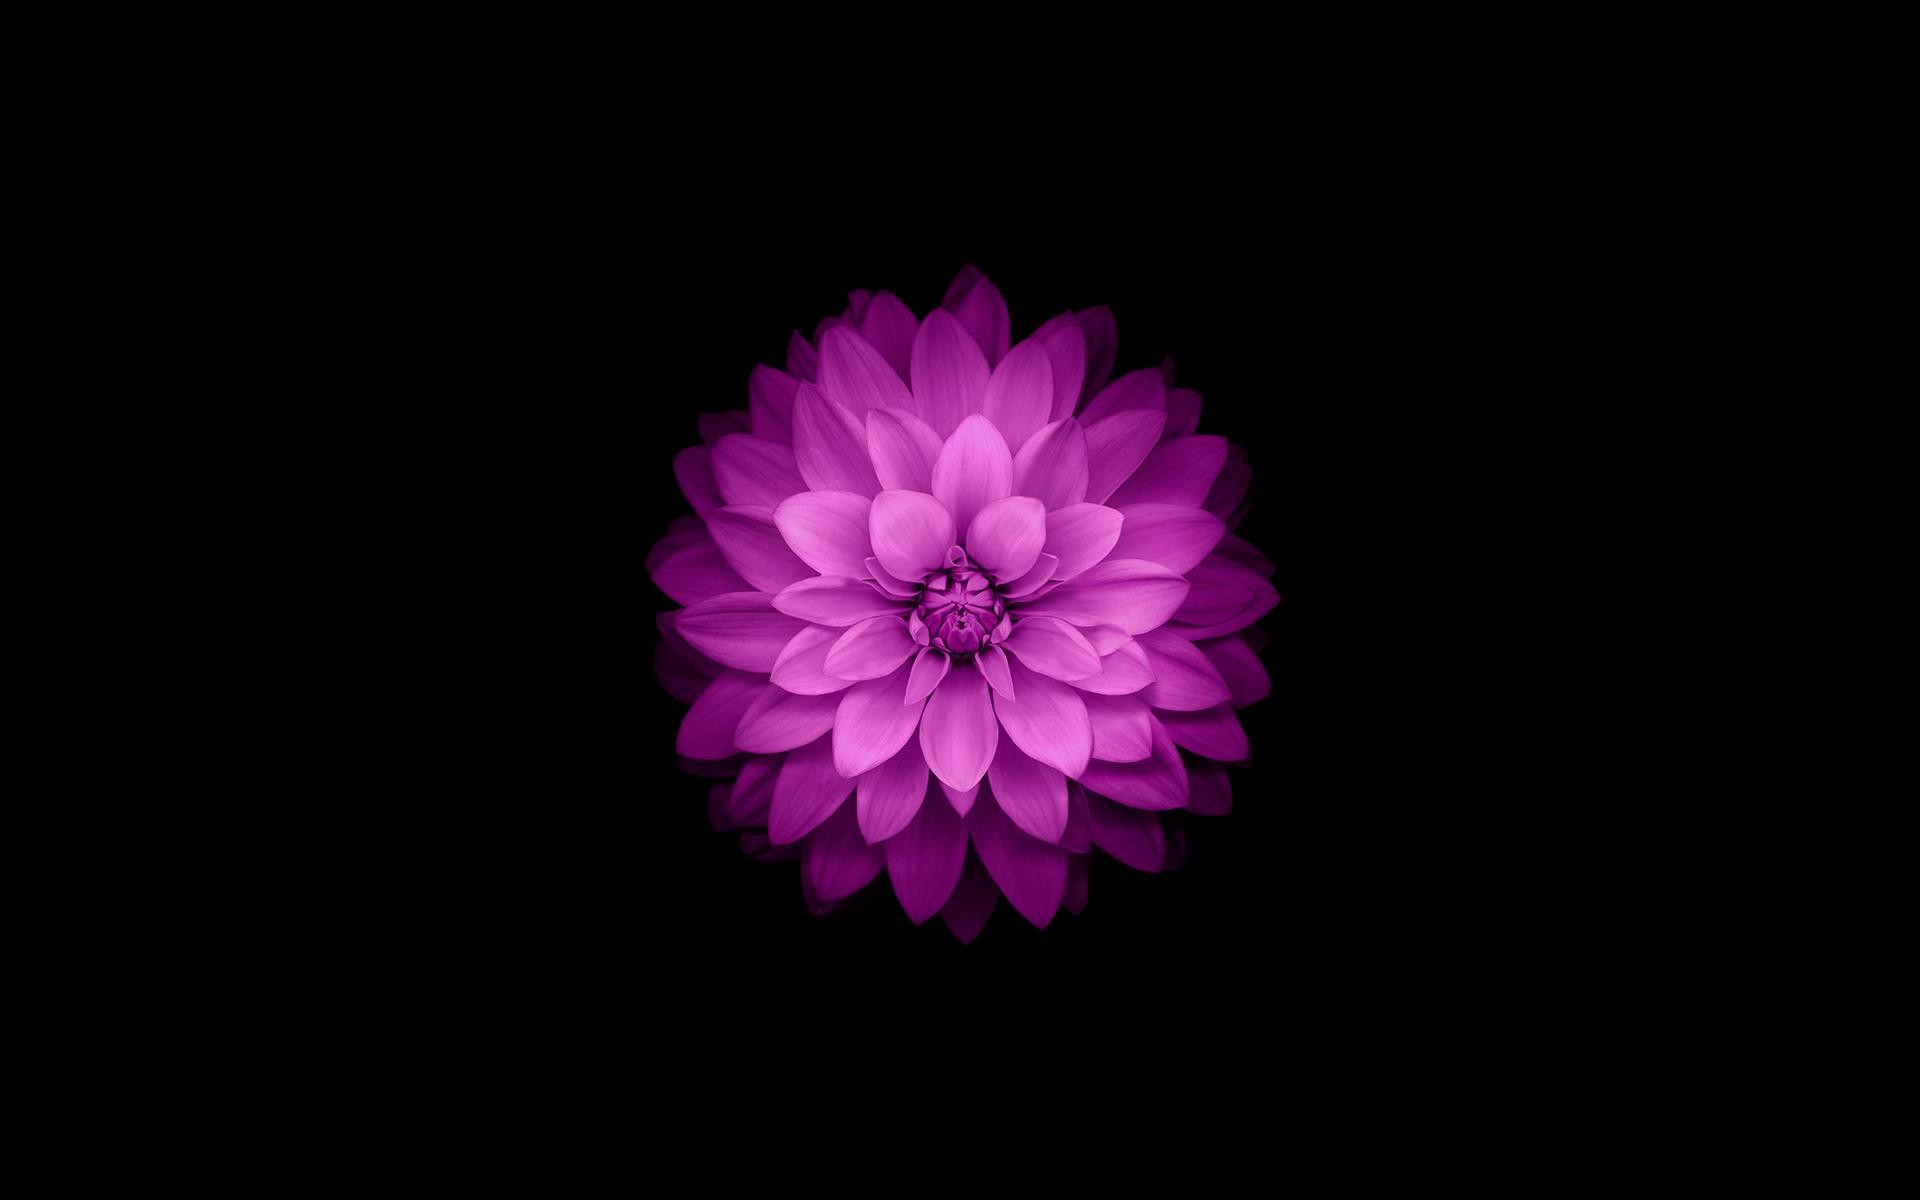 Supported Resolutions - Pink Lotus Wallpaper For Iphone - HD Wallpaper 